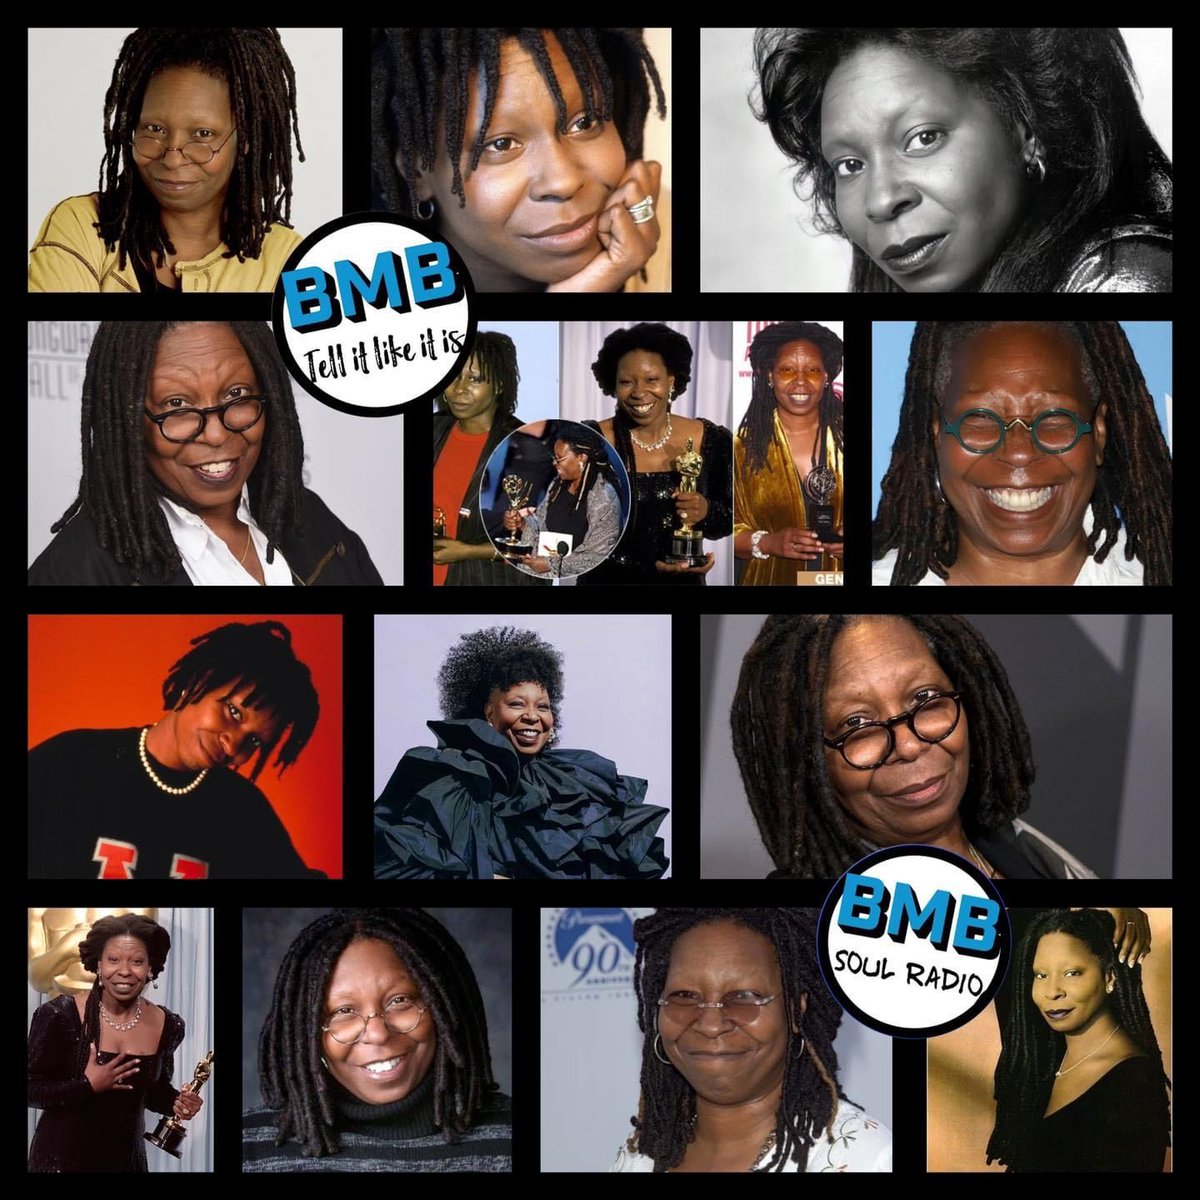 🎂🎈🎁🥳🎉 Happy Birthday Whoopi Goldberg!
She Is 68 Today! #happybirthday #WhoopiGoldberg  #TheColorPurple #Ghost #SisterAct #SisterAct2 #MadeInAmerica #GhostOfMississippi #ForColoredGirls #TheView #EGOT